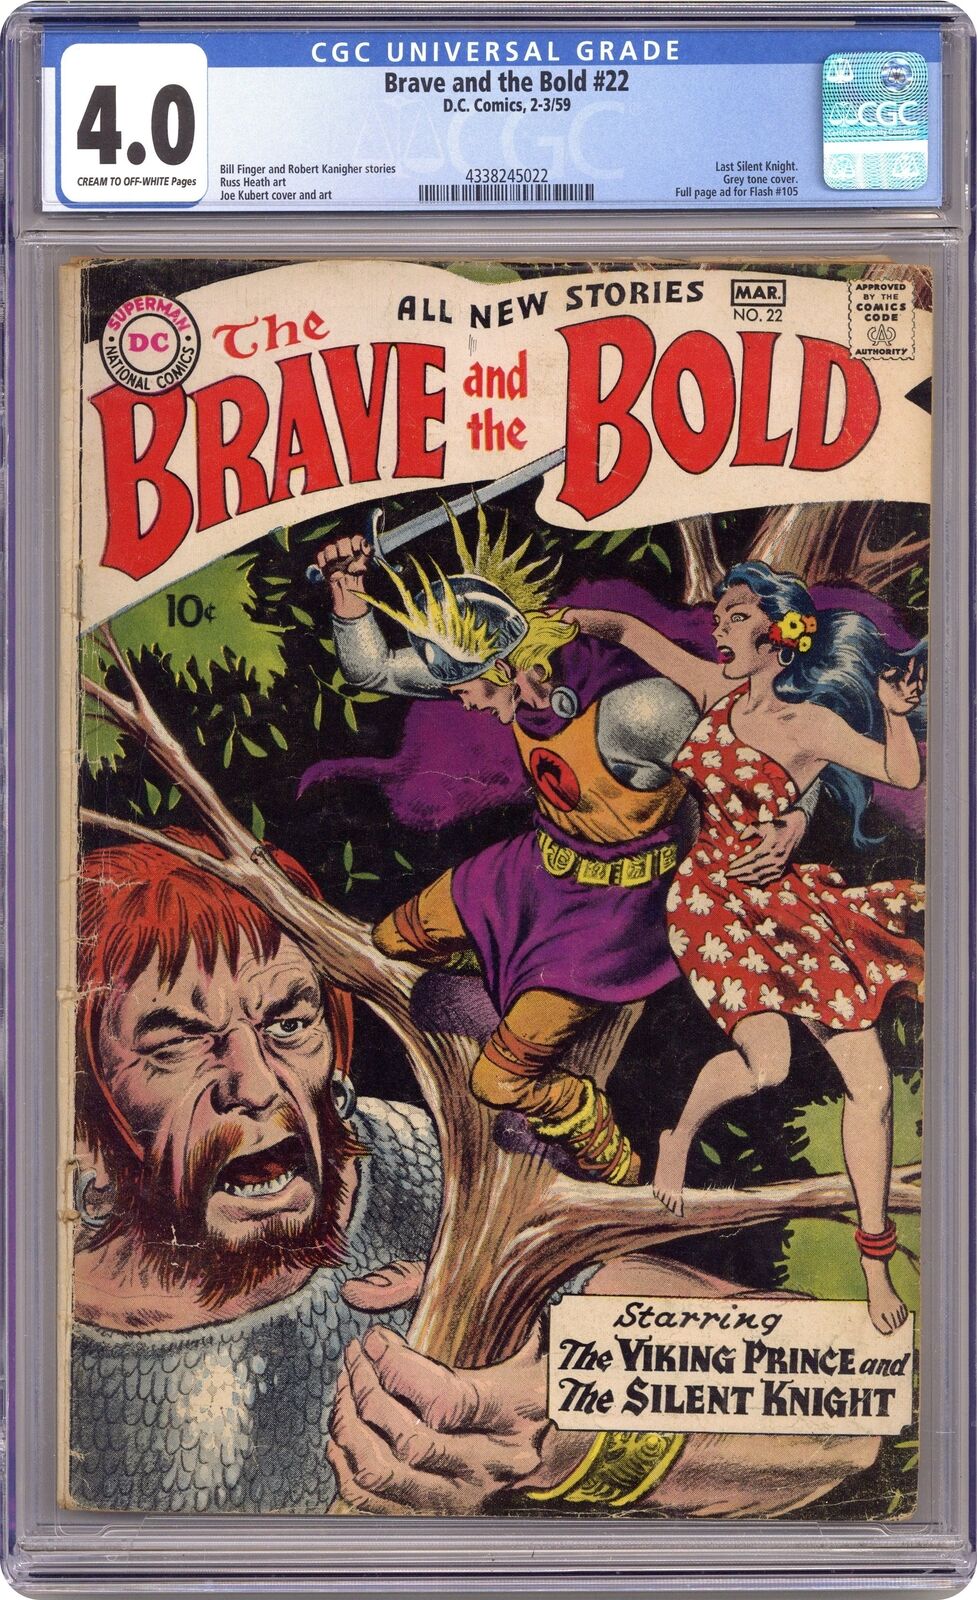 Brave and the Bold #22 CGC 4.0 1959 4338245022